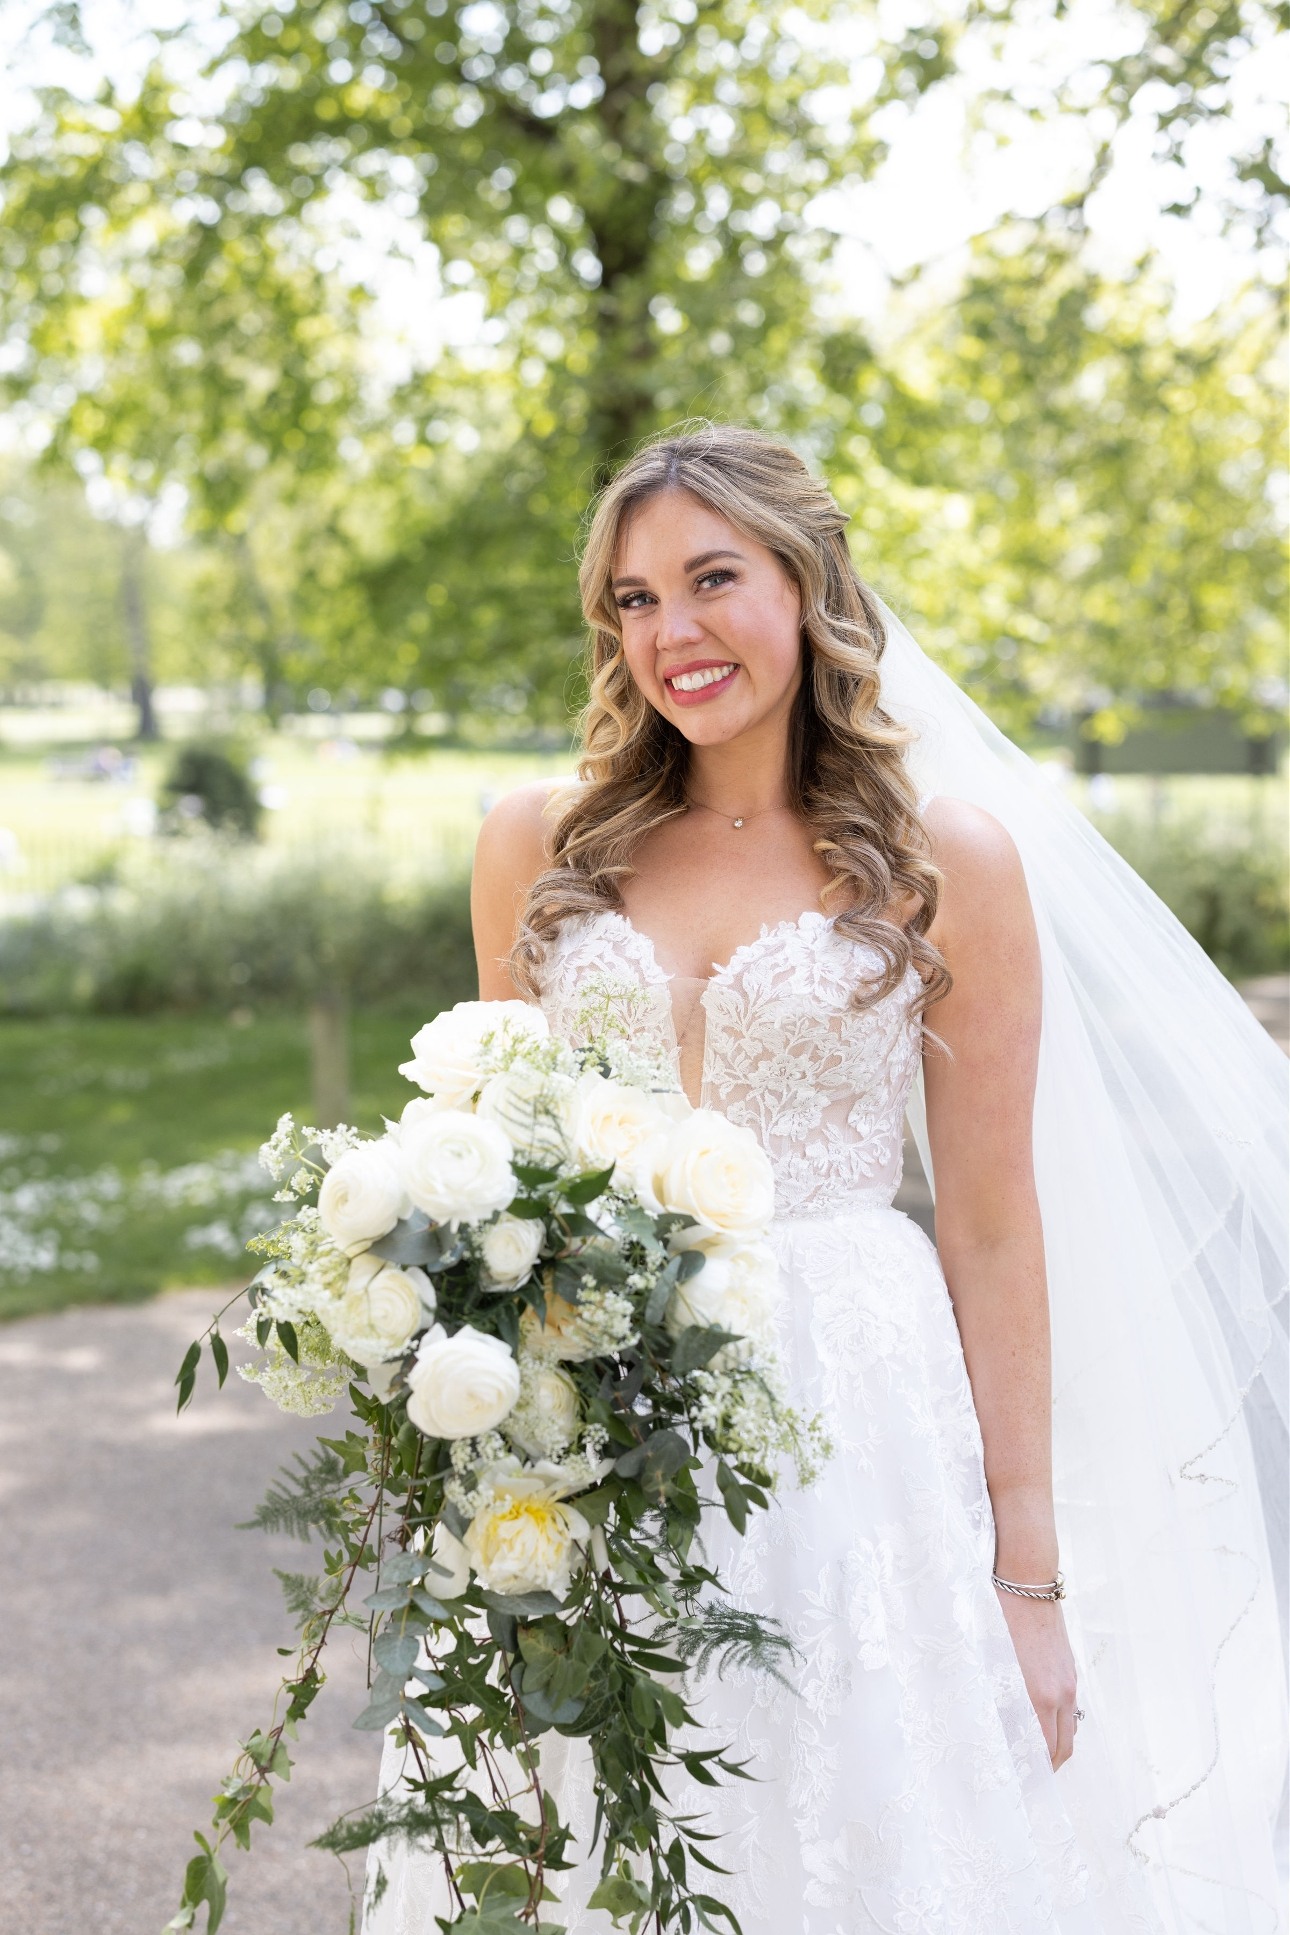 bride with big smile in wedding dress holding white and green bouquet